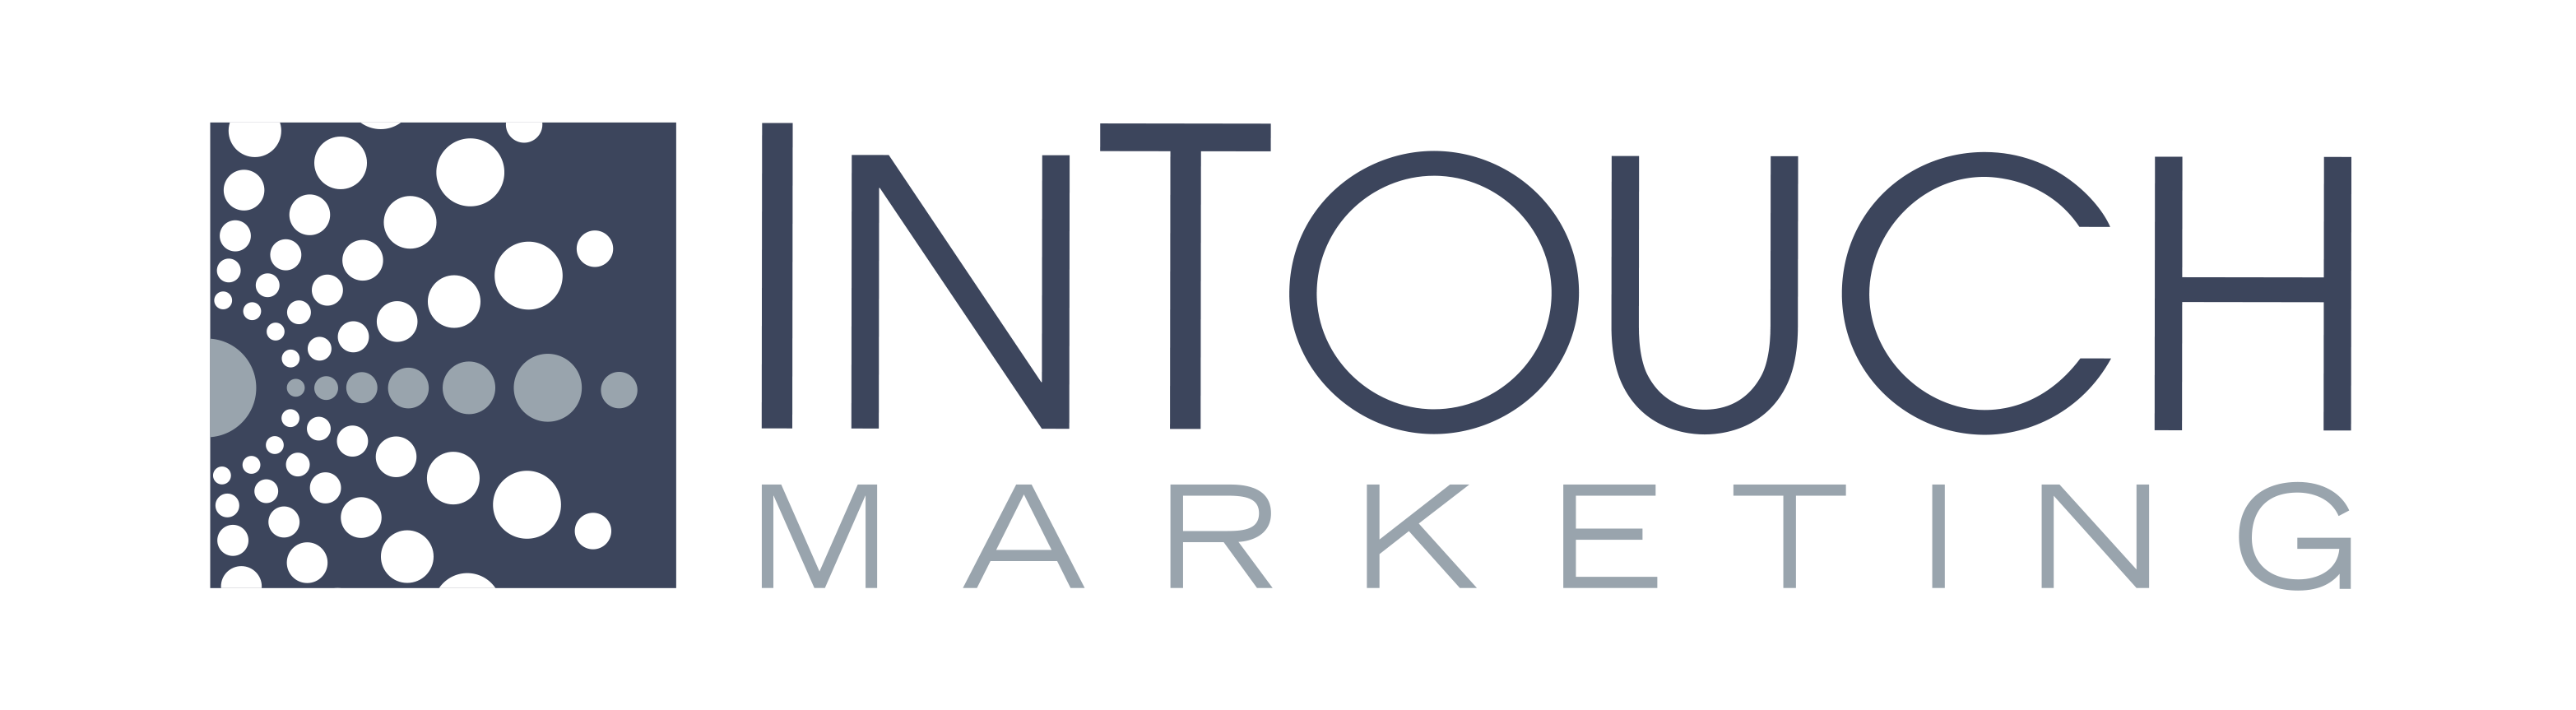 InTouch Marketing